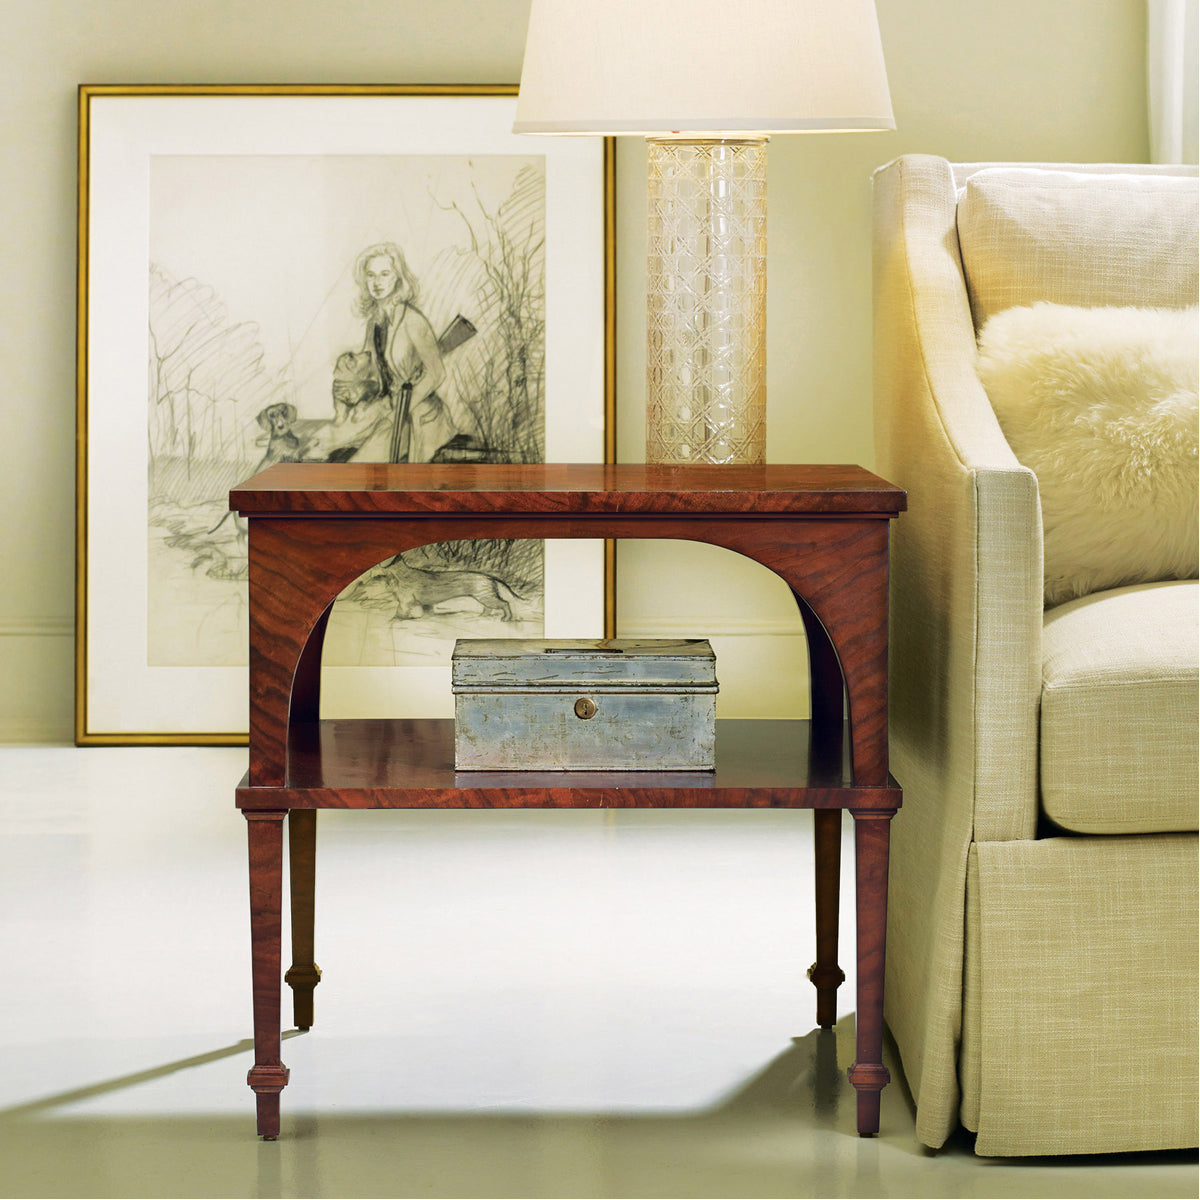 Modern History Classical End Table with Shelf - Walnut